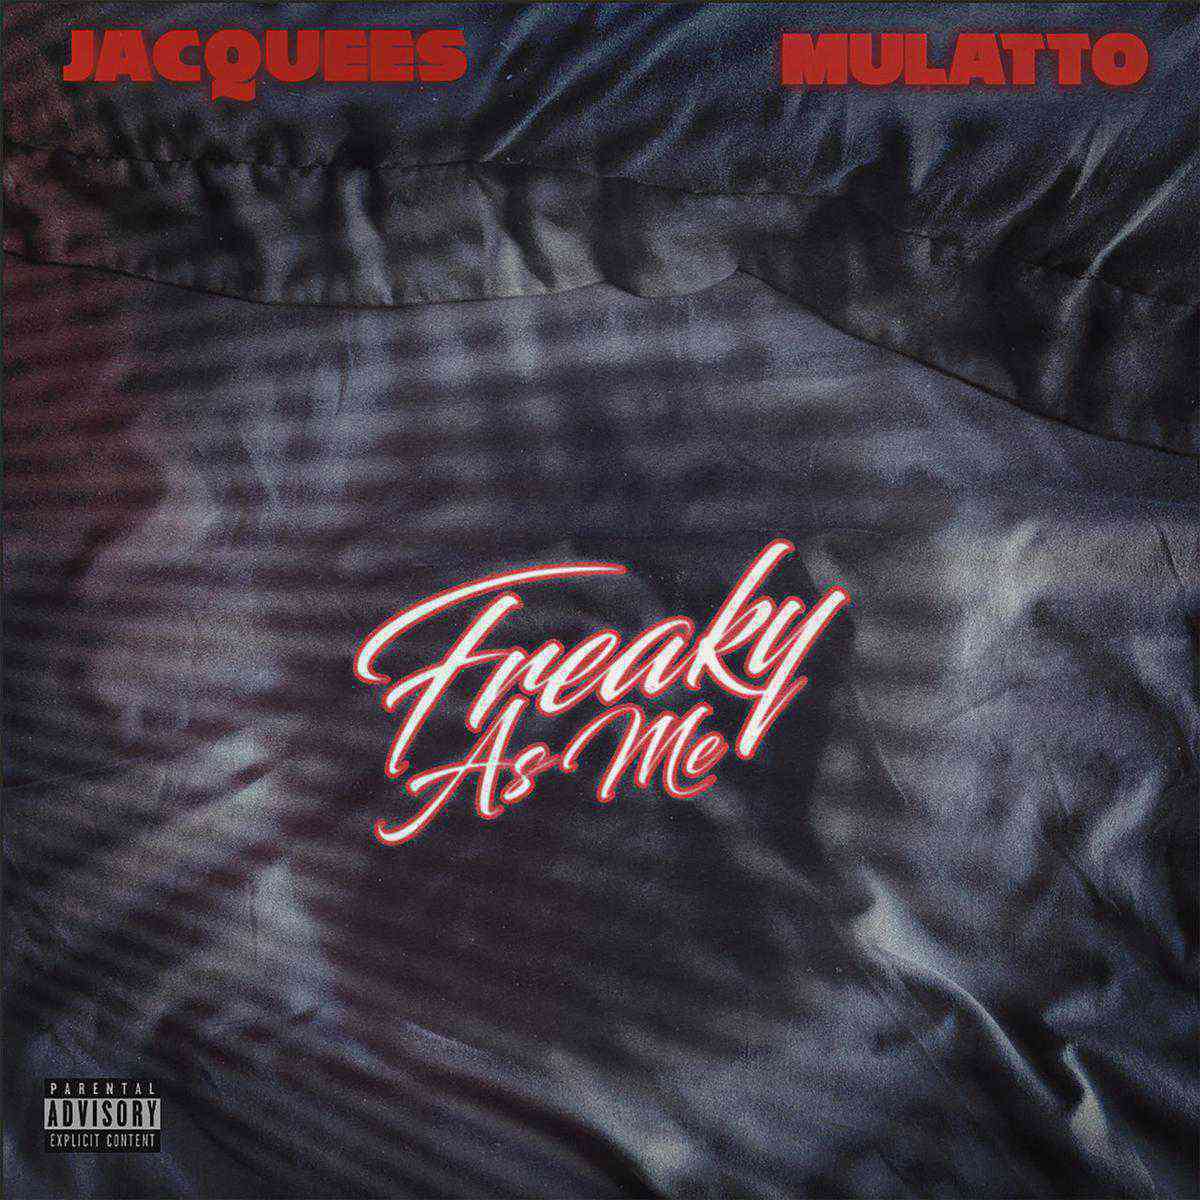 Jacquees - Freaky As Me Ft. Mulatto